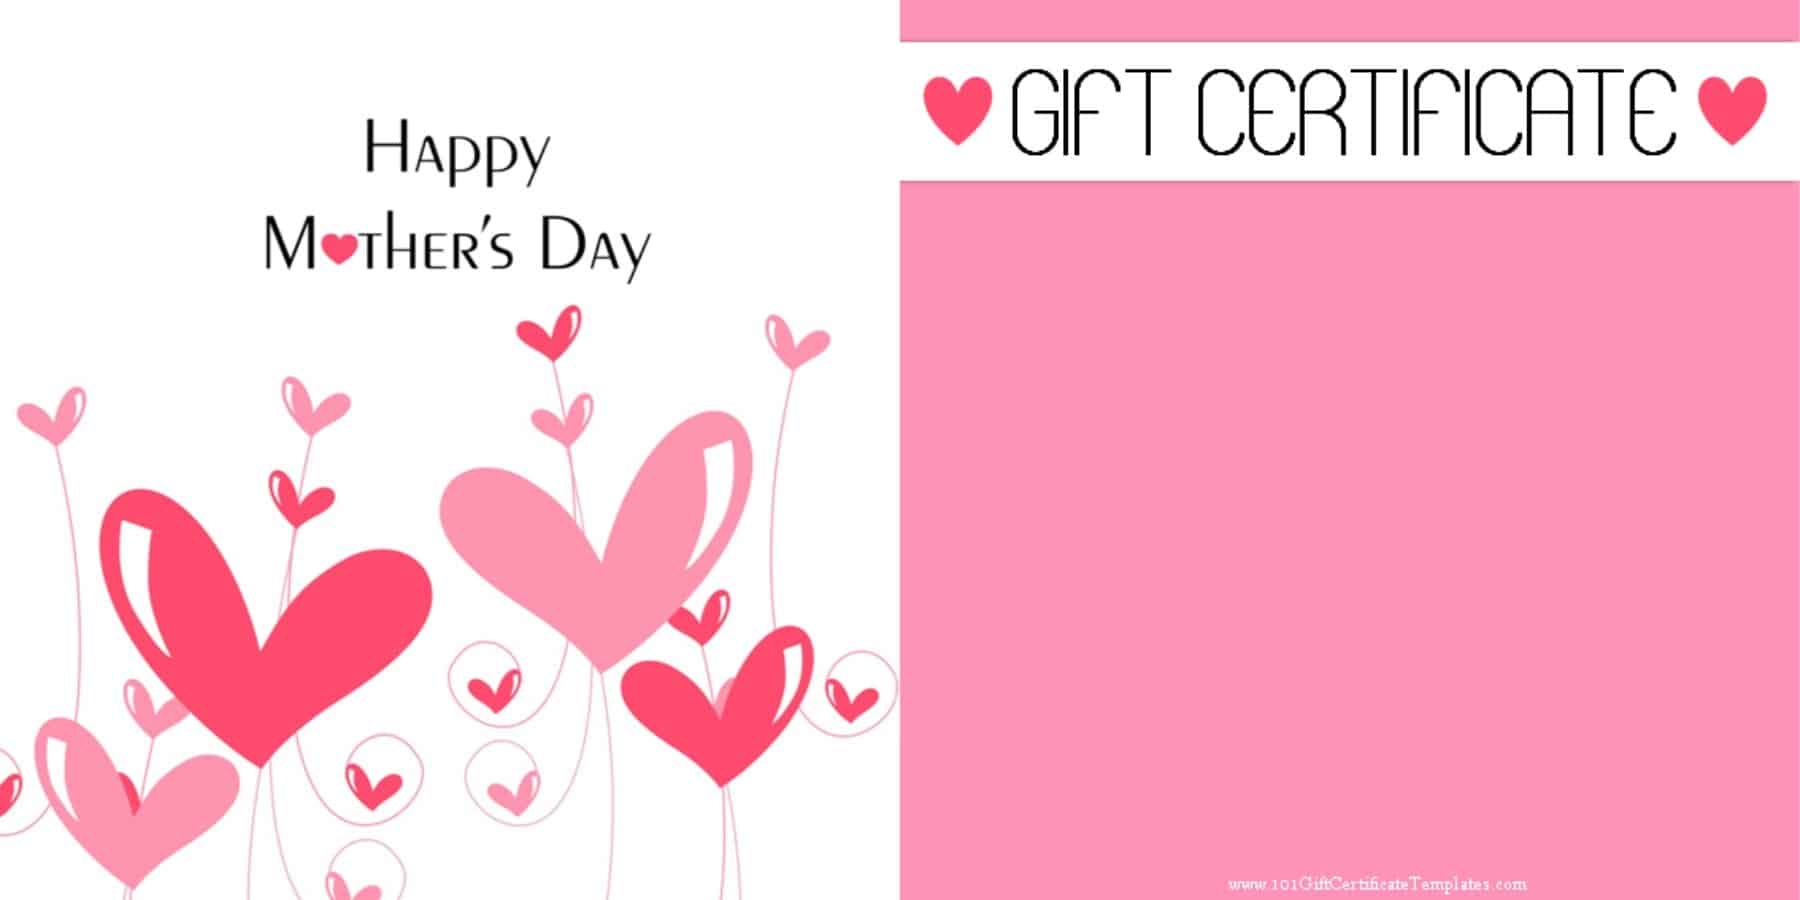 92 Format Mother S Day Card Blank Template Templates for Mother S Day Card Blank Template